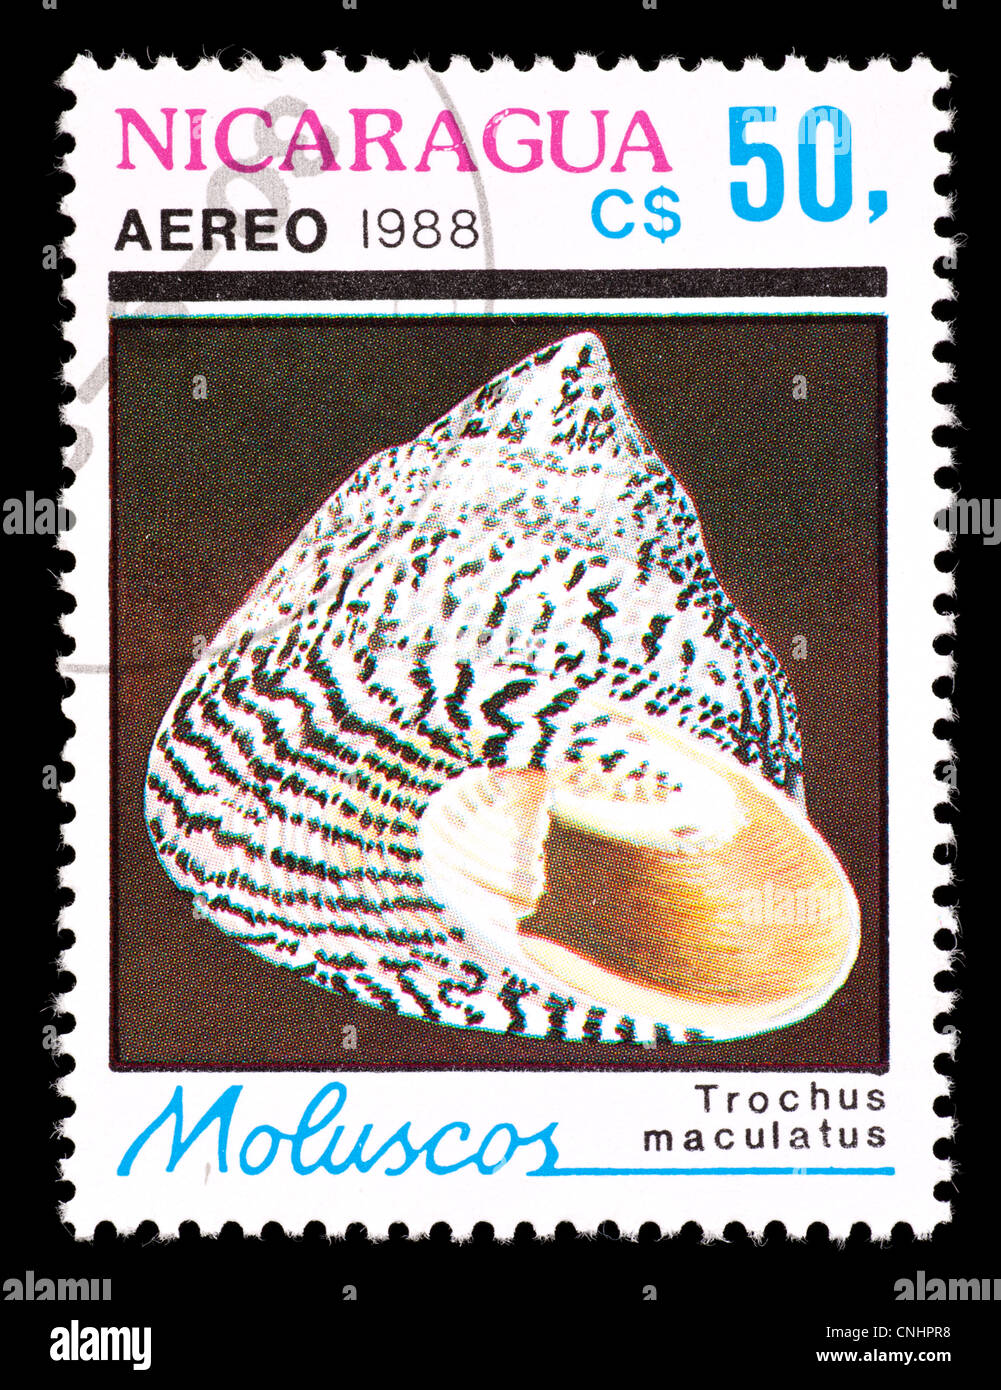 Postage stamp from Nicaragua depicting a top snail (Trochus maculatus) Stock Photo